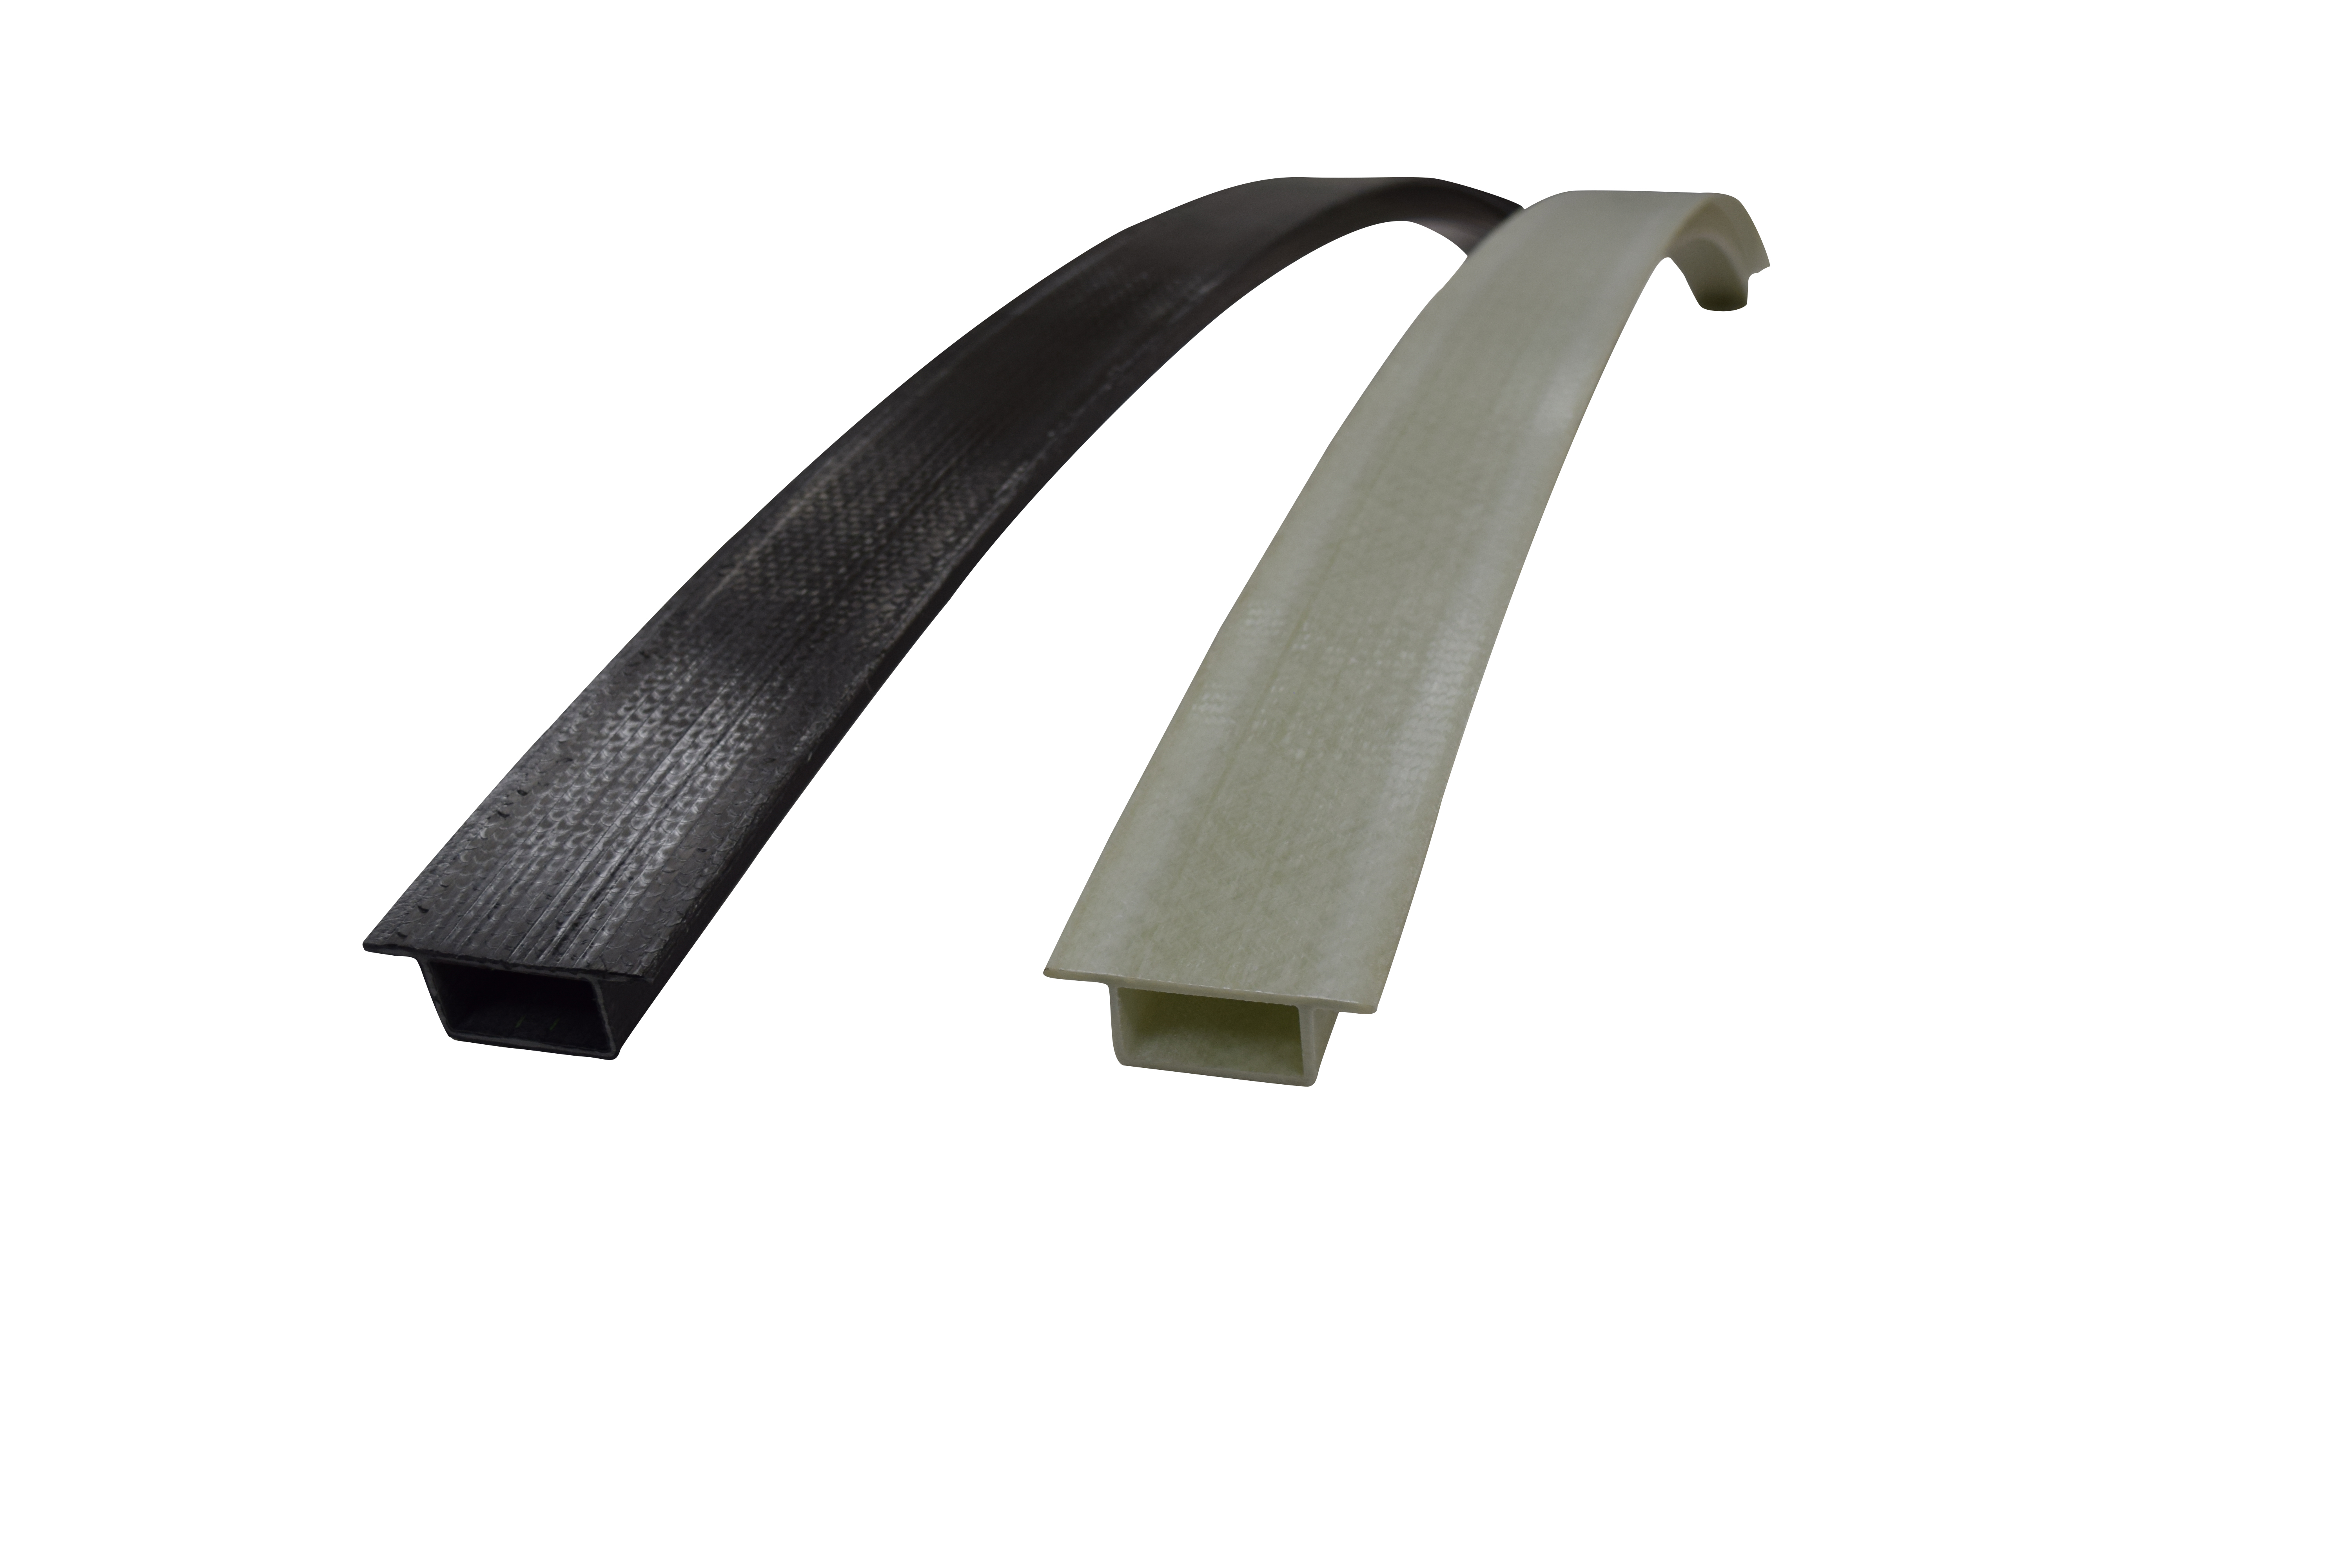 The company will be exhibiting a carbon fiber reinforced plastic (CFRP) bumper/fender.